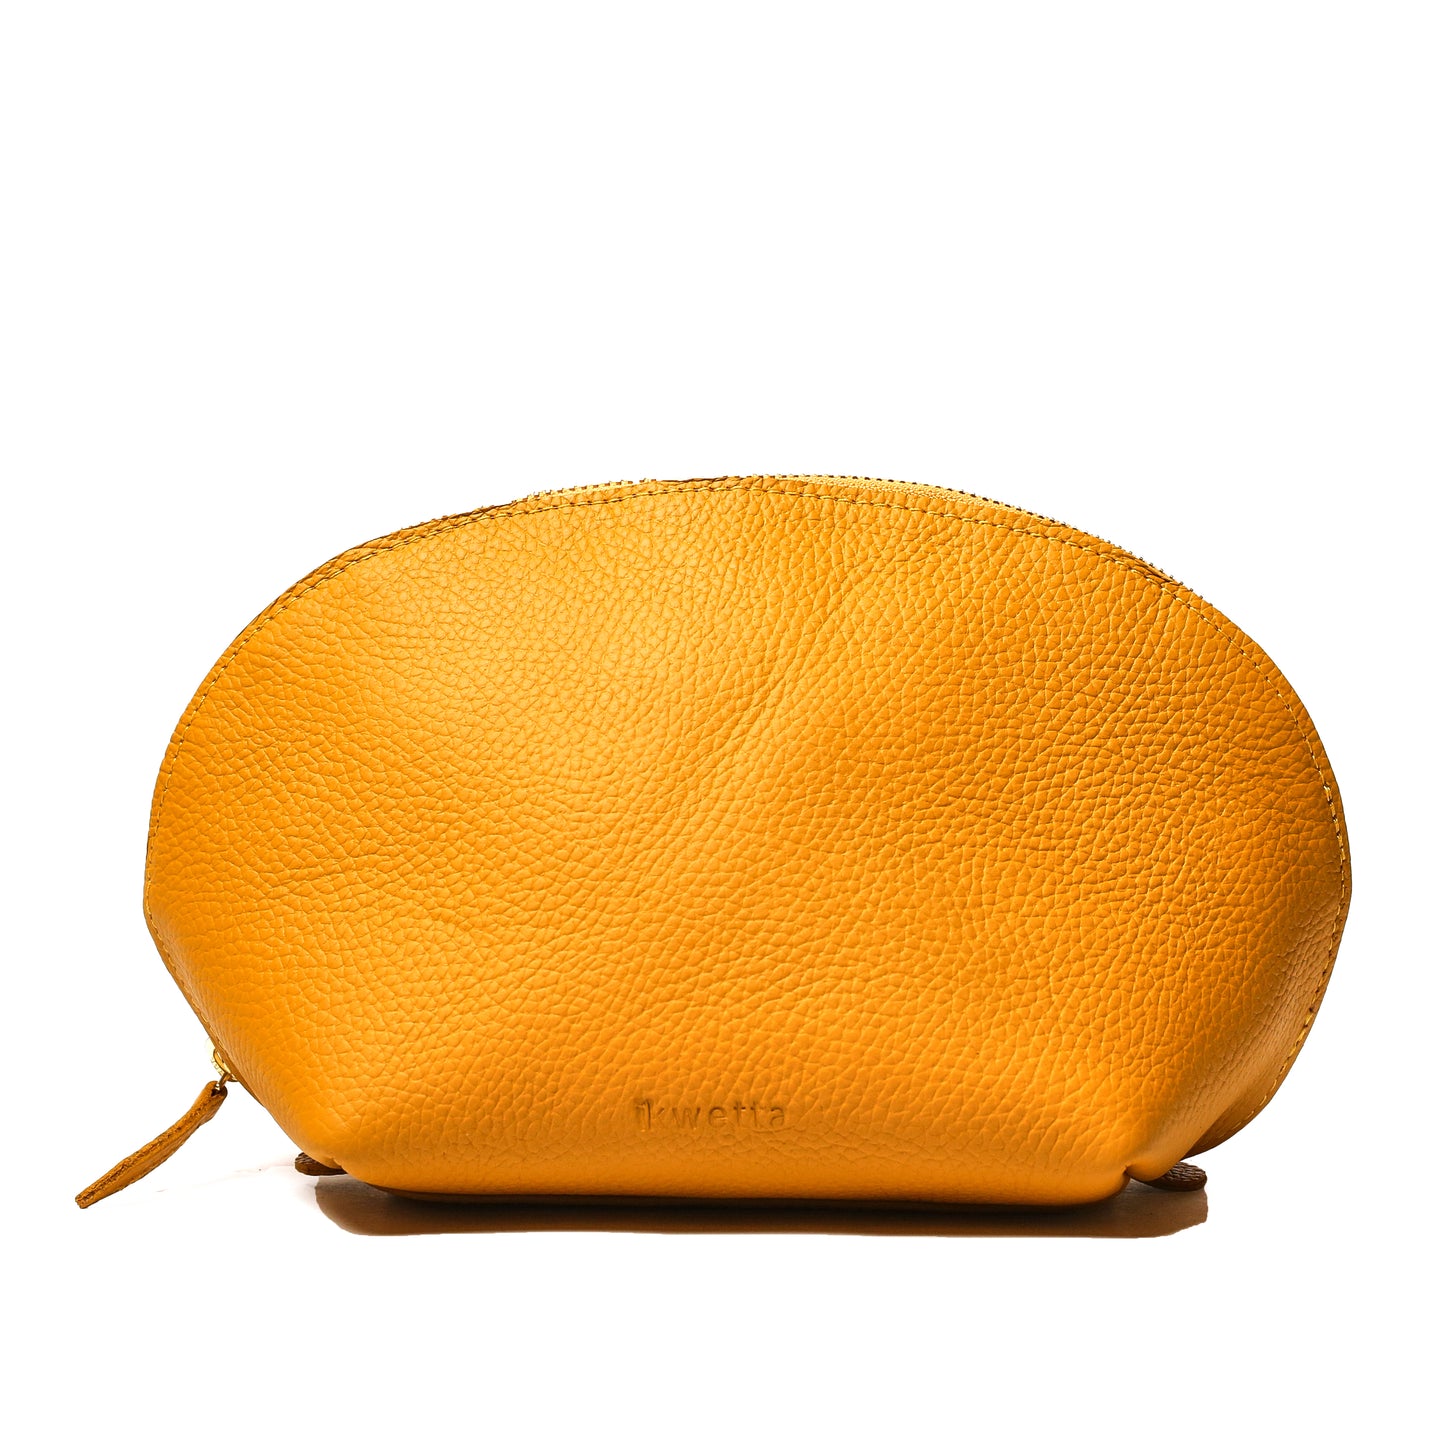 Viringo travel case in golden yellow natural dyed milled leather